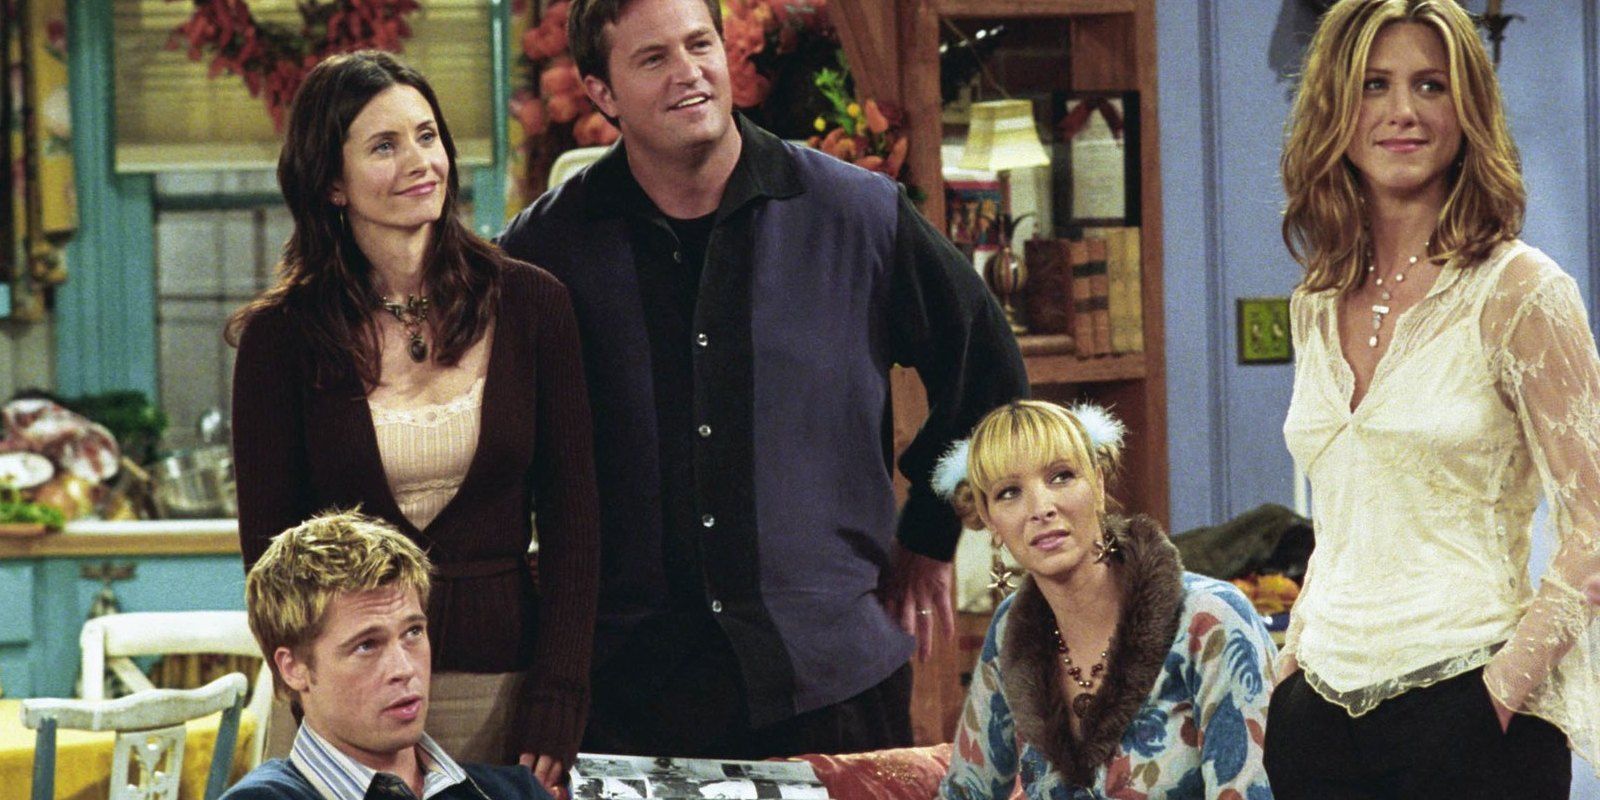 10 Best Holiday Episodes Of TV Shows (That Arent About Christmas)